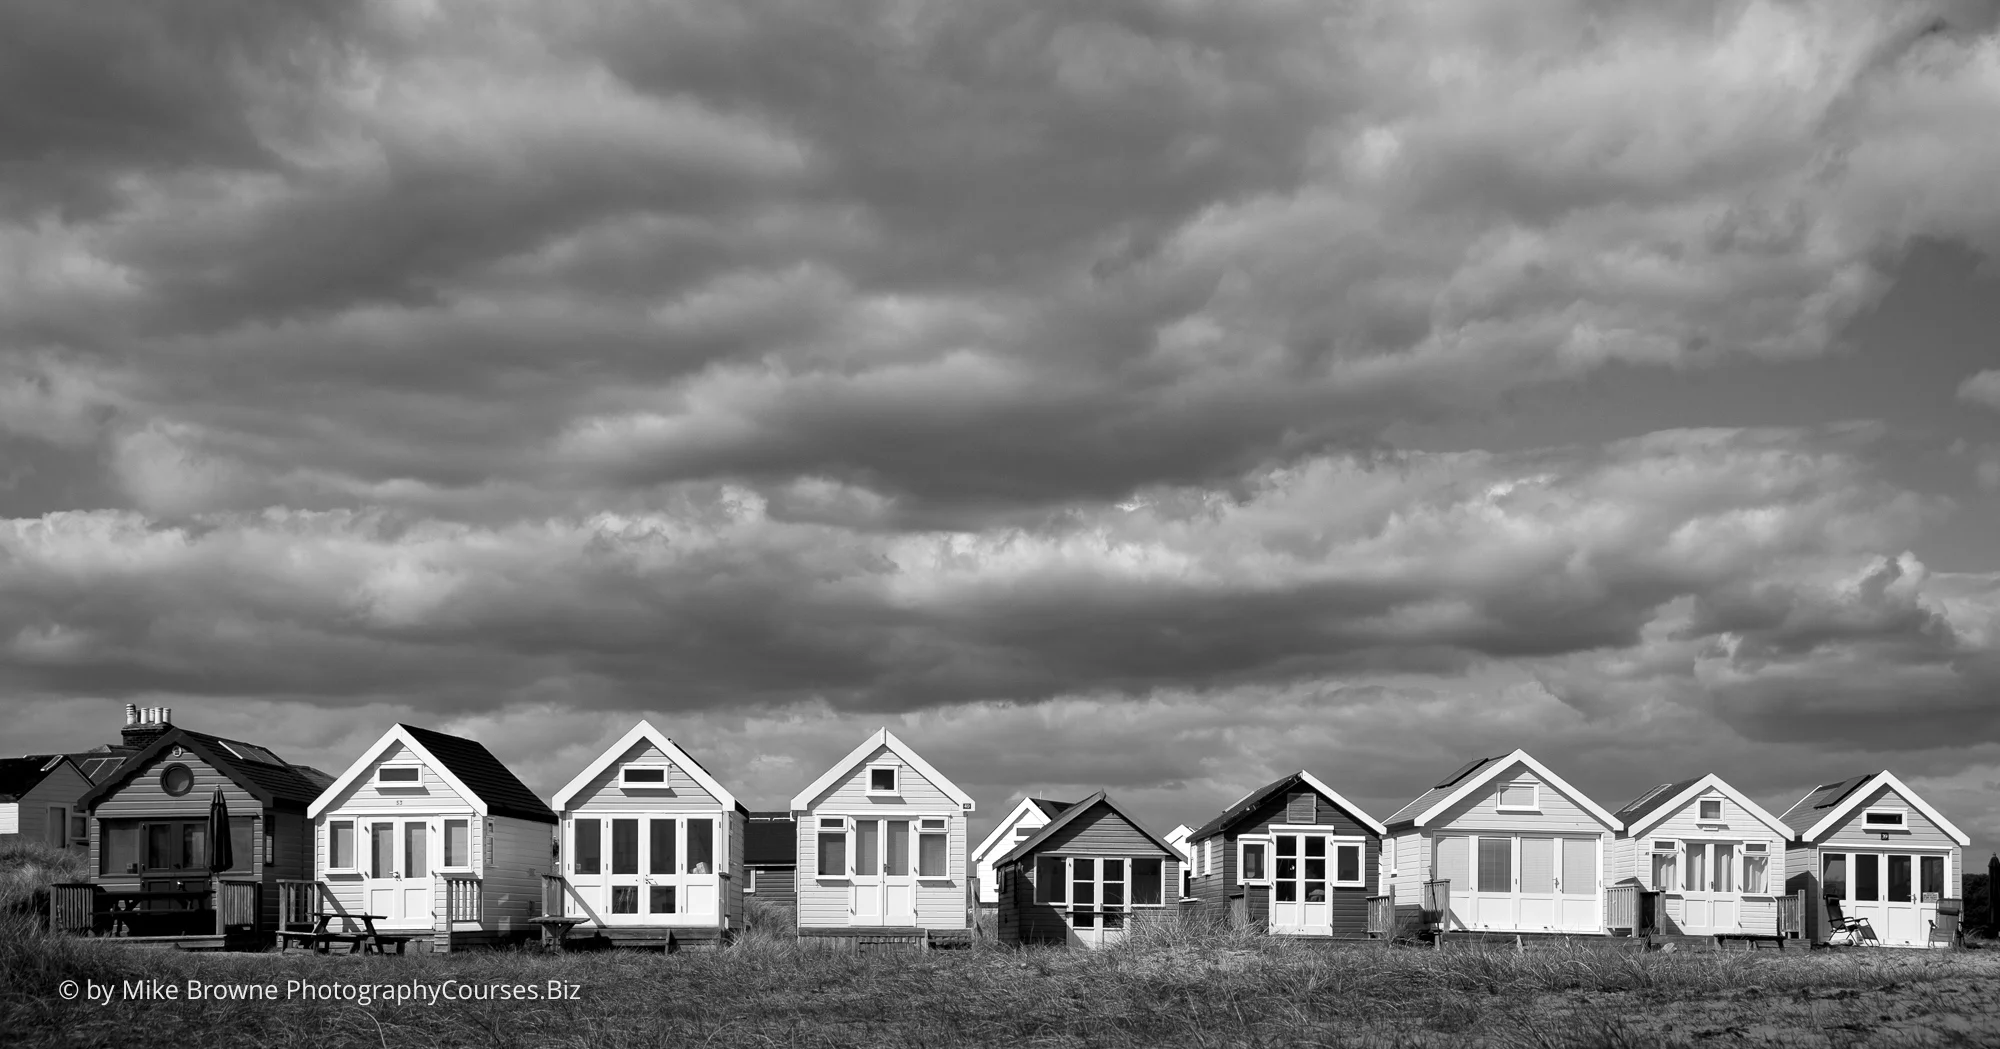 Row of nine beach huts in sunshine with storm clouds in sky